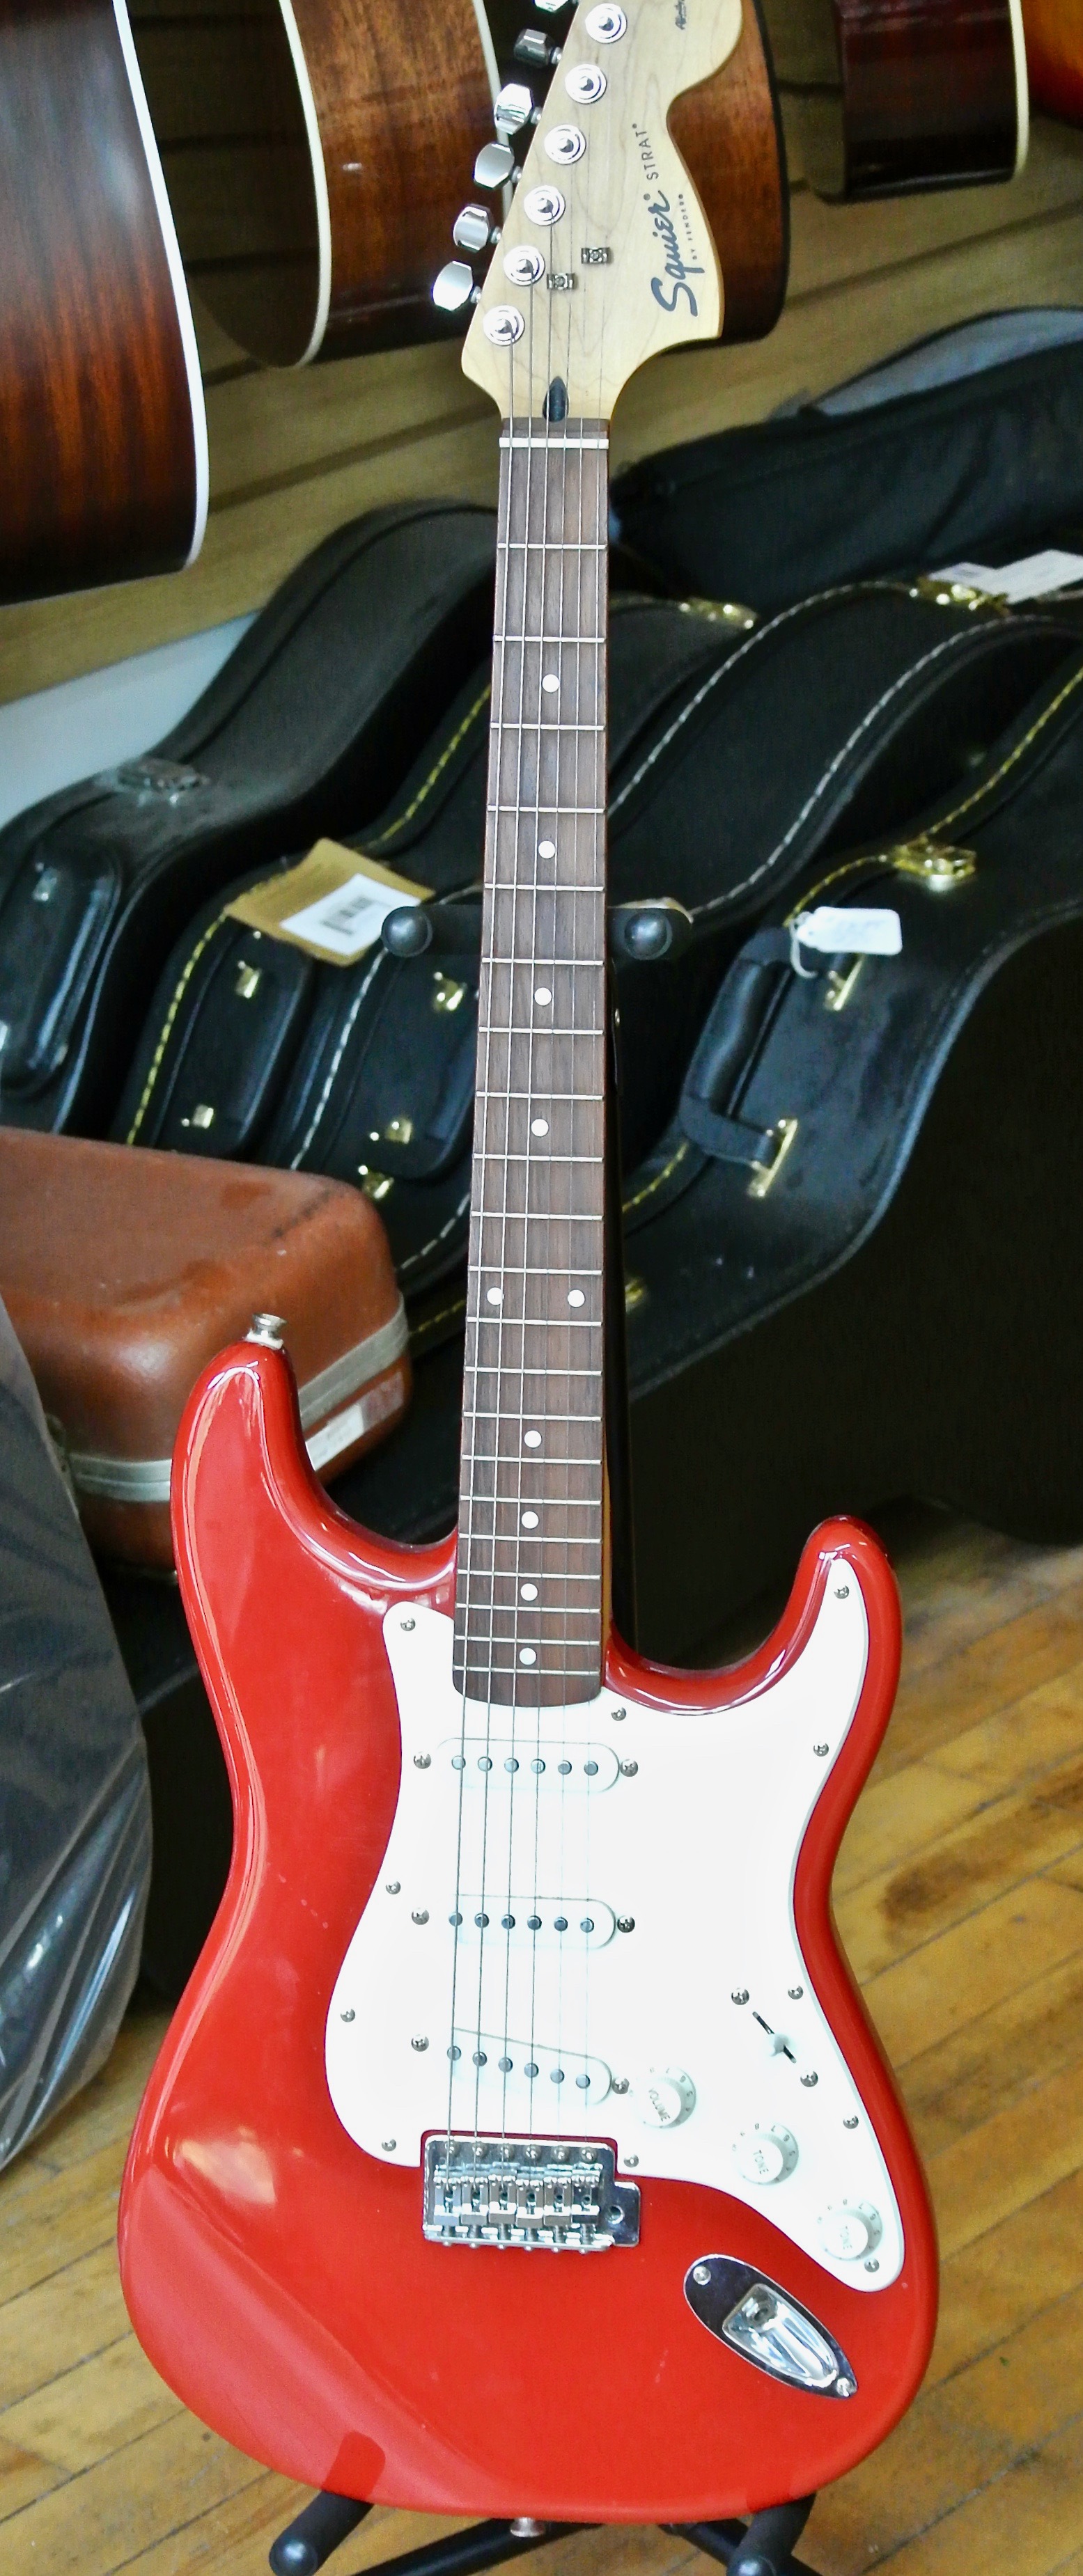 Used Squire Strat